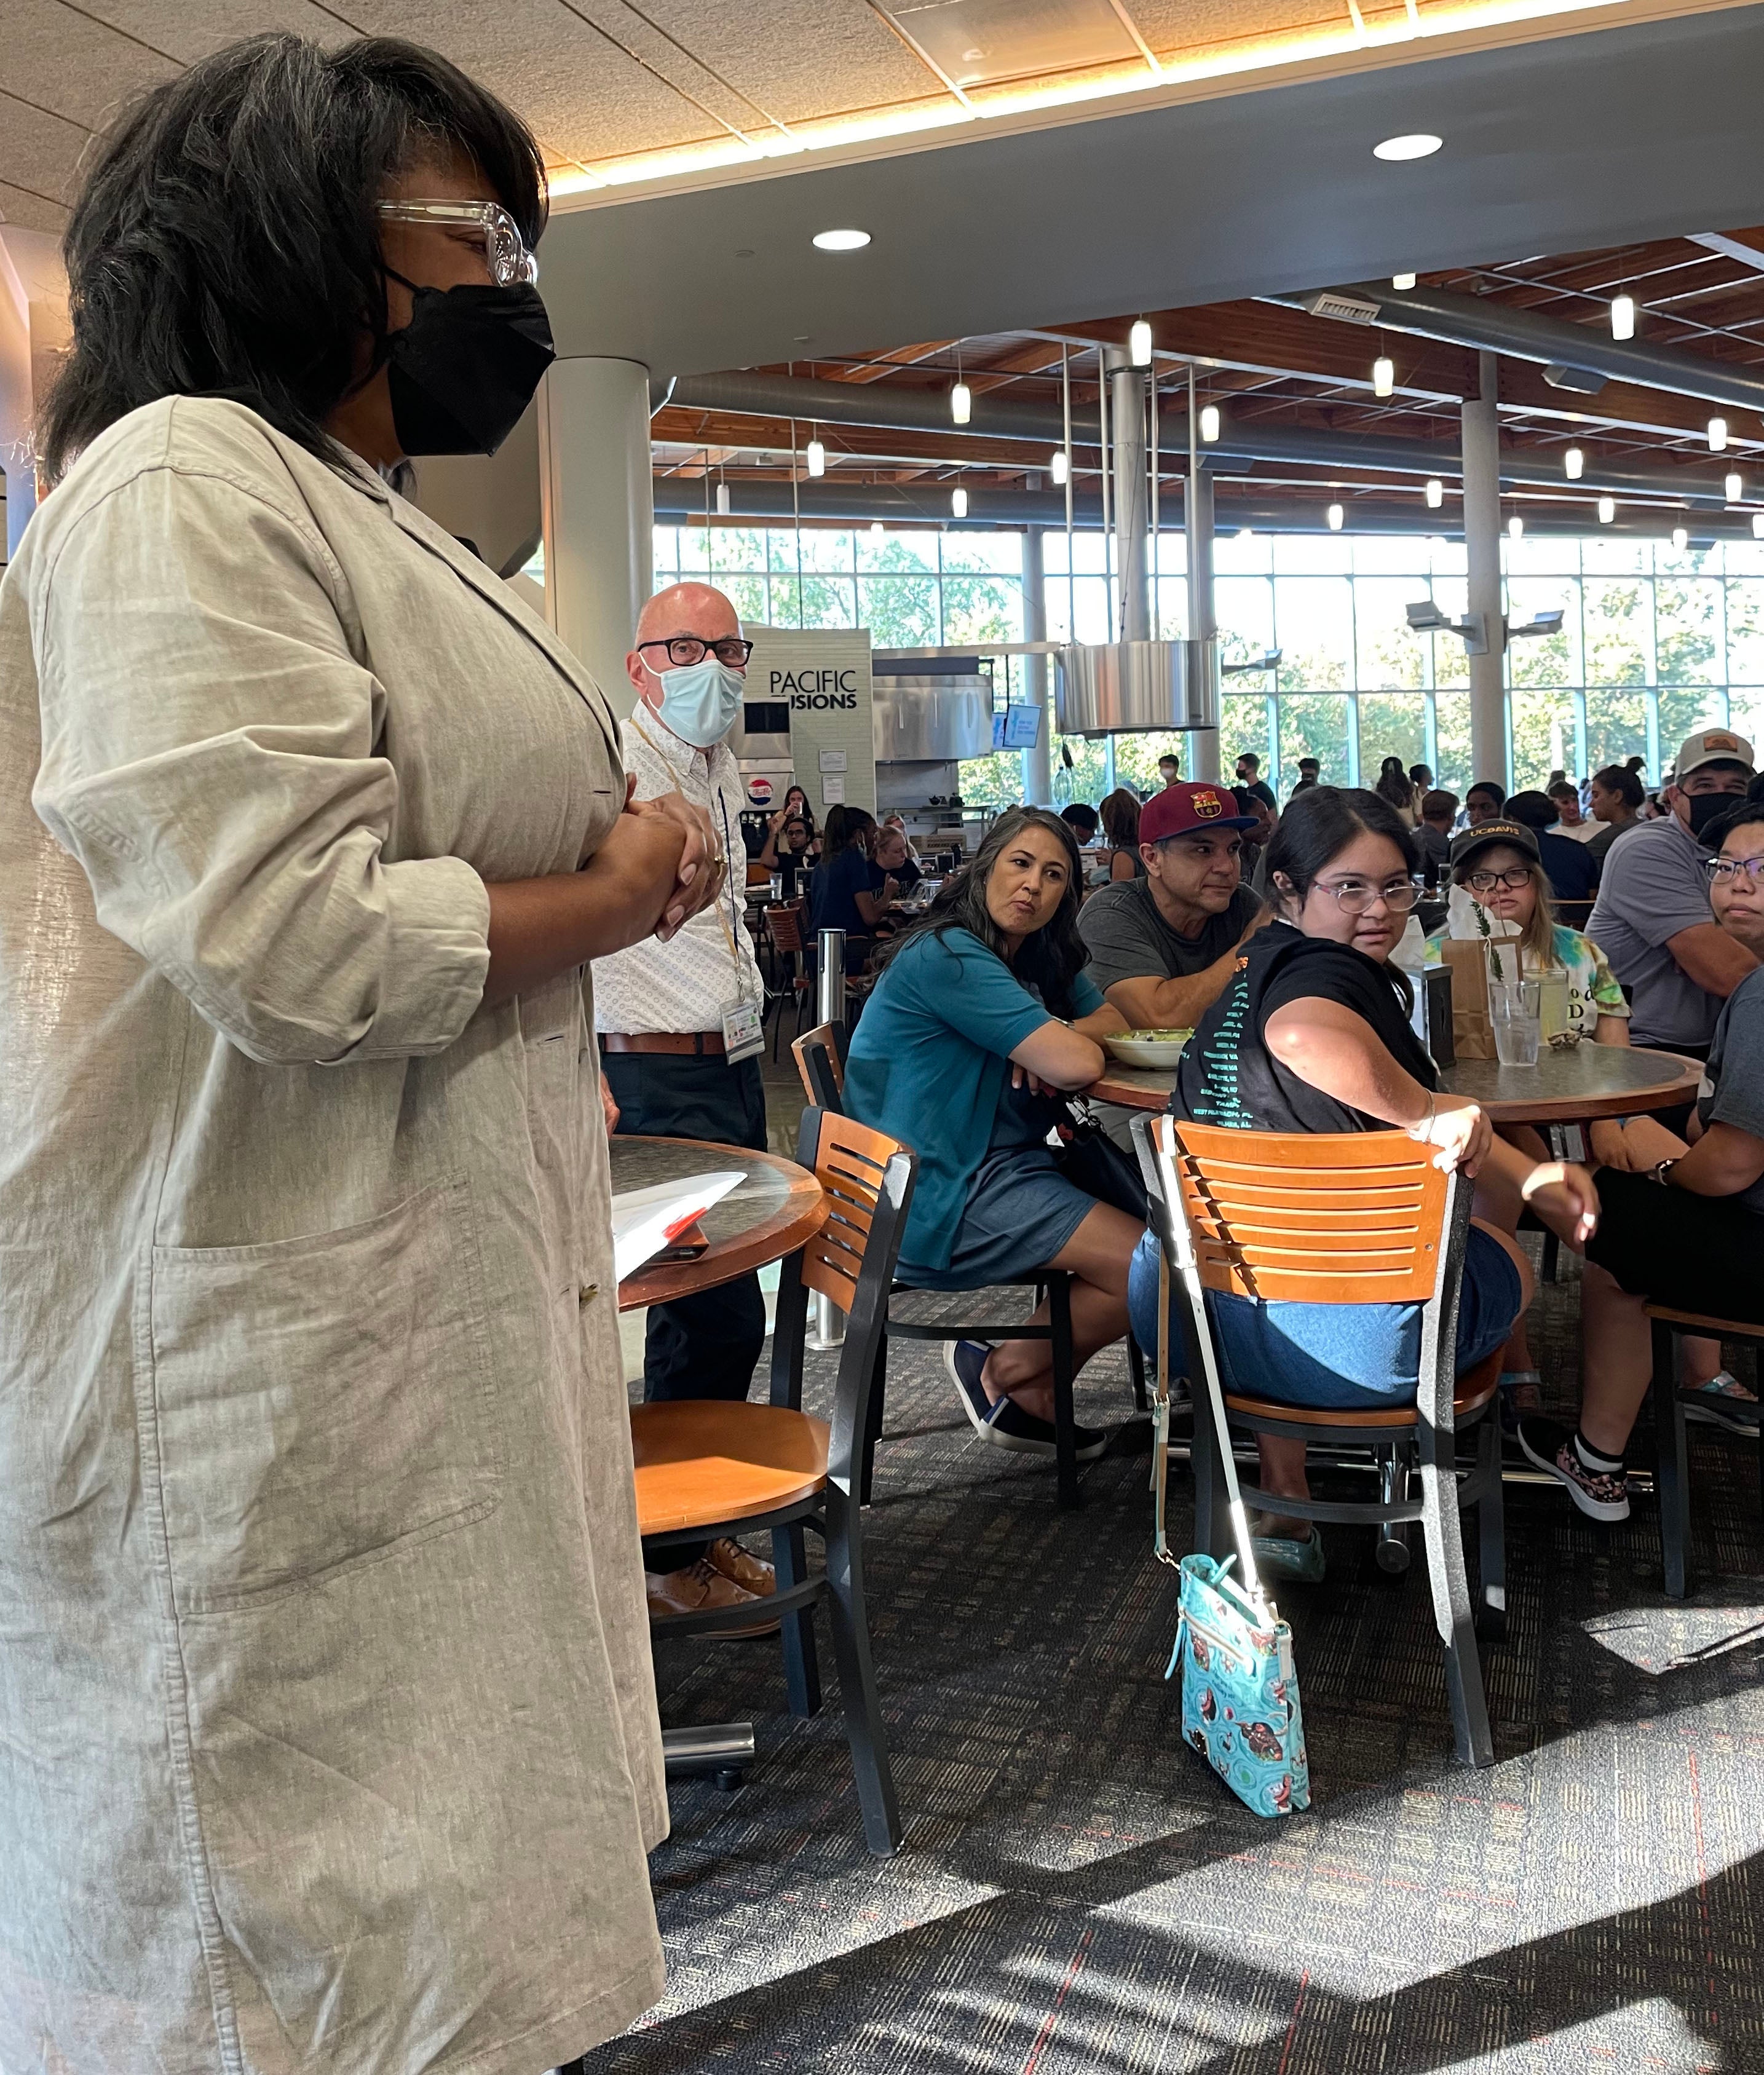 Renetta Tull talks to a crowd in the dining commons